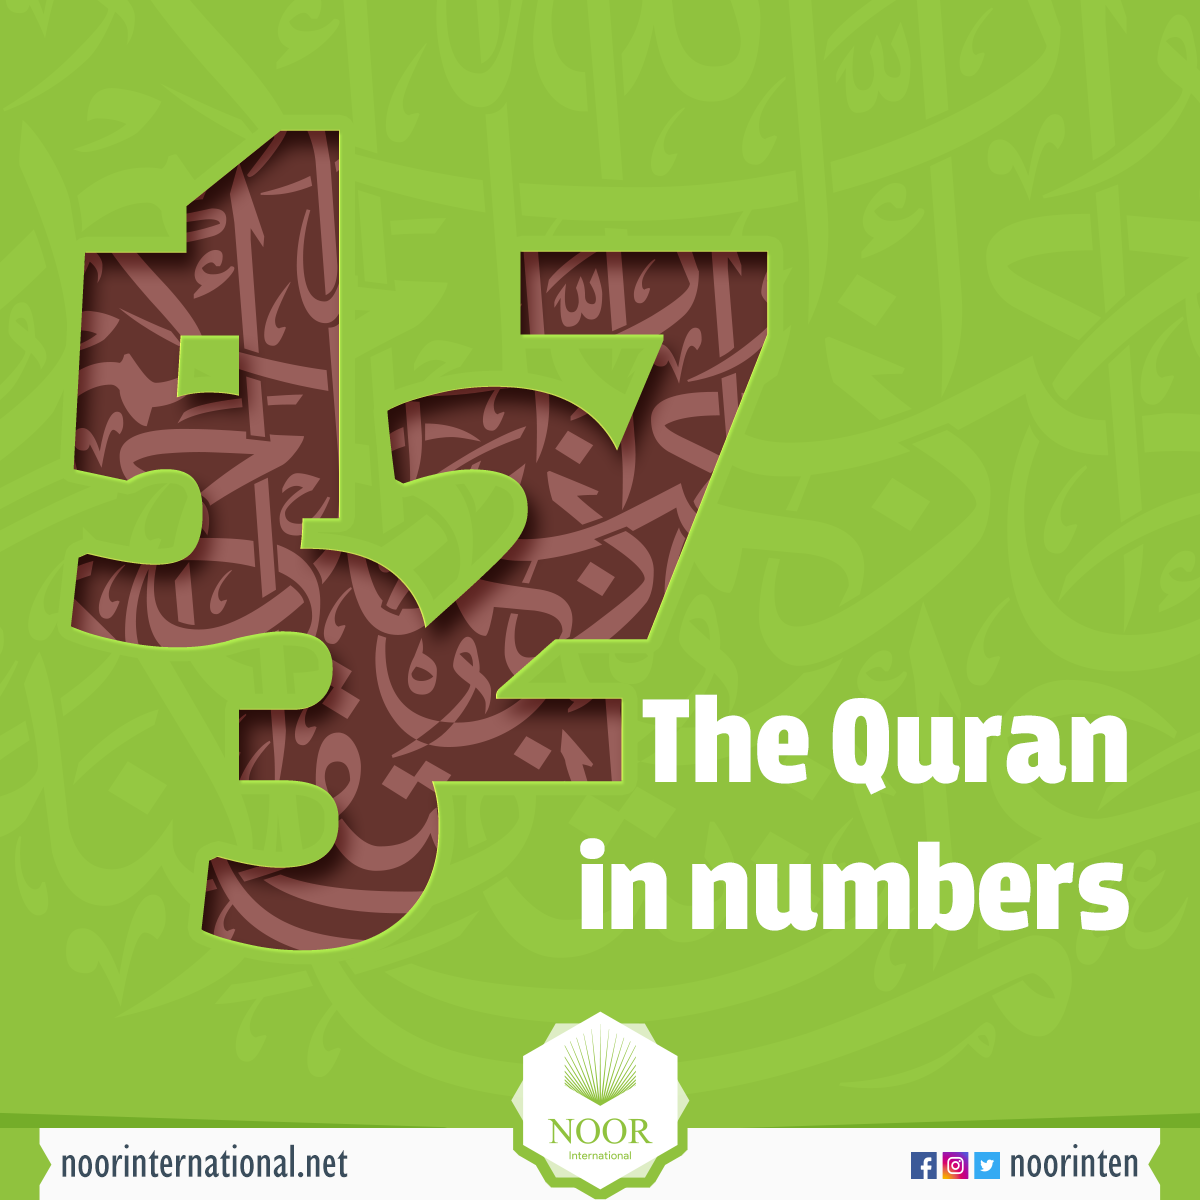 The Quran in numbers